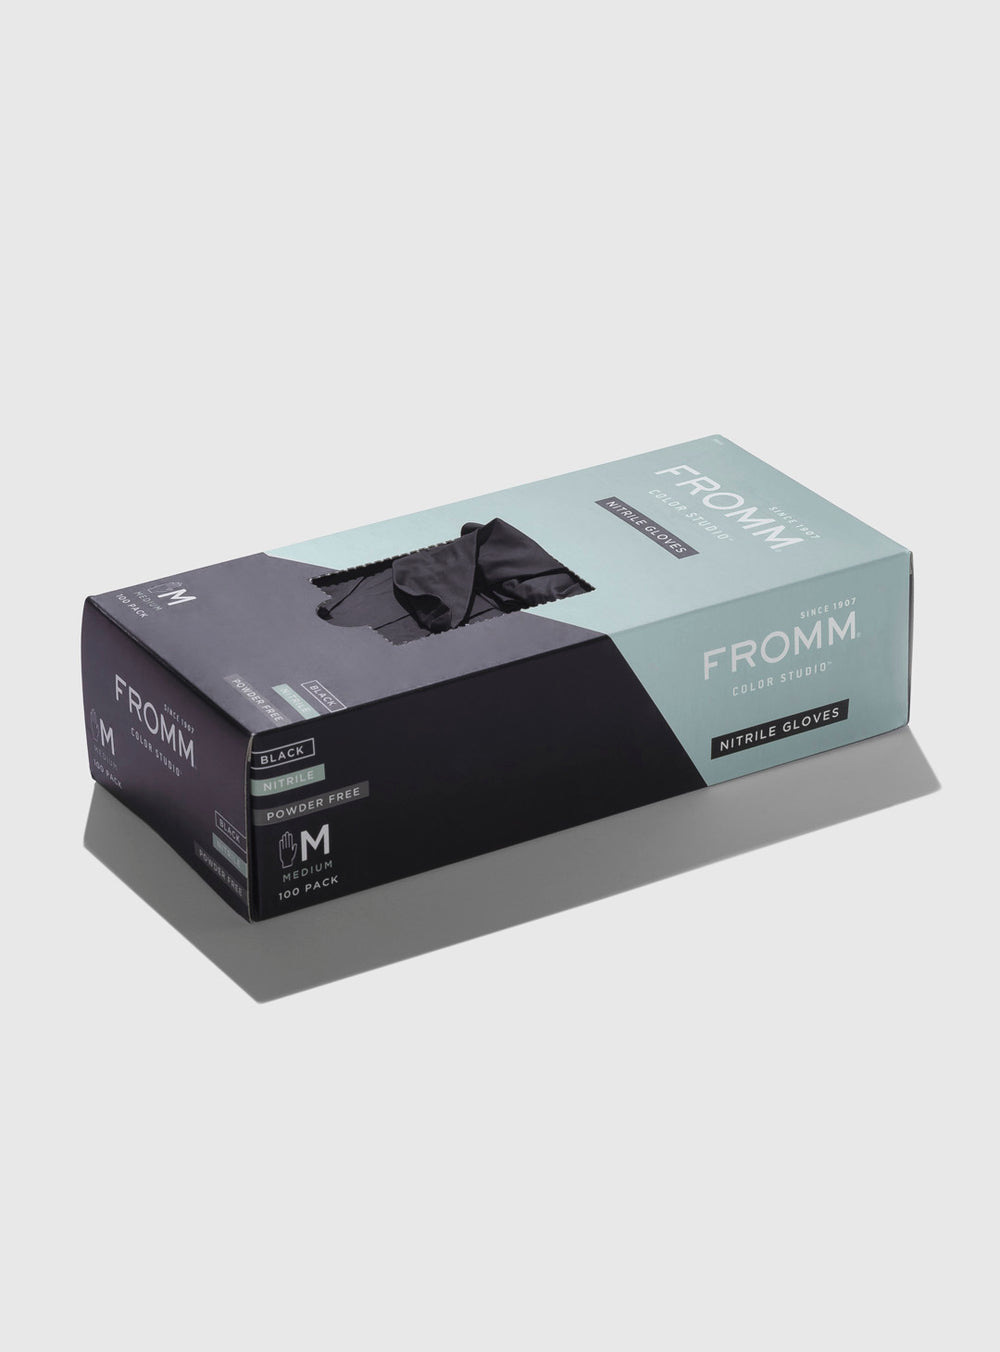 FROMM Black Nitrile Glove 100 Pack